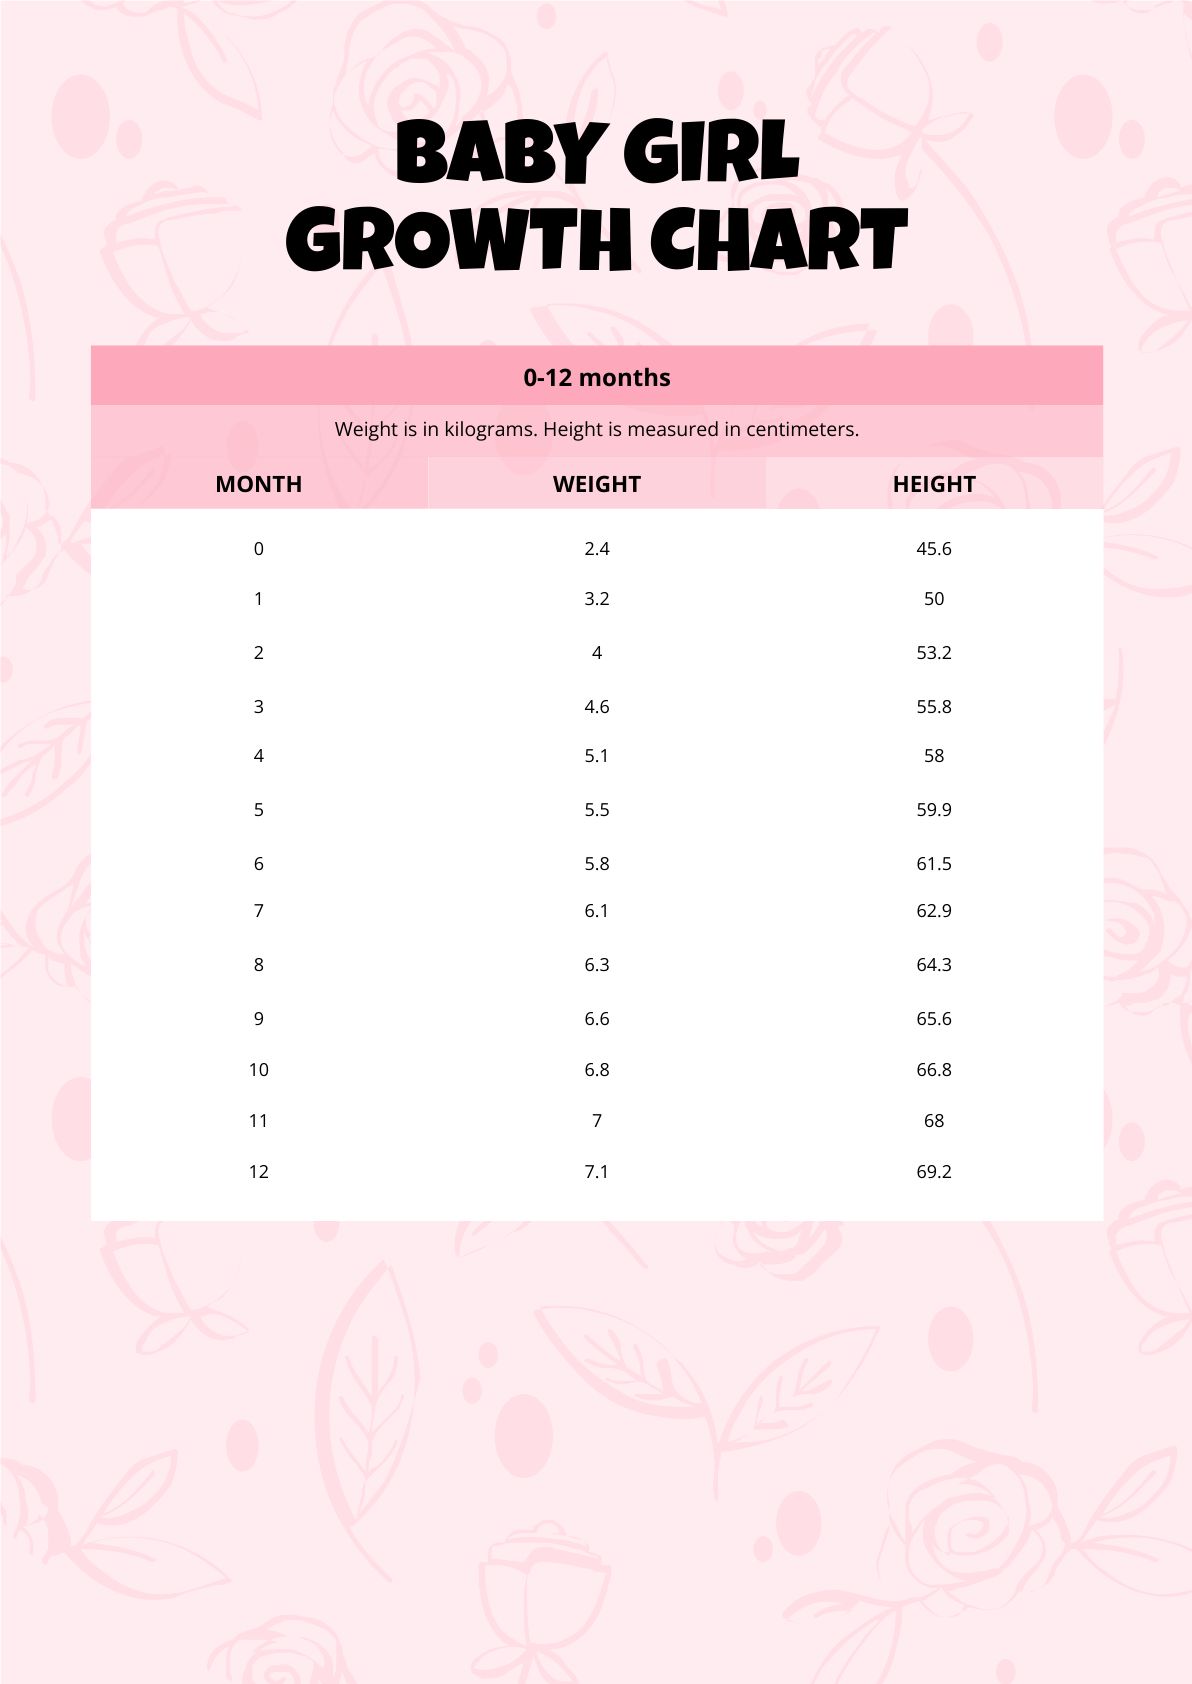 Free Breastfed Baby Growth Chart - PDF | Template.net